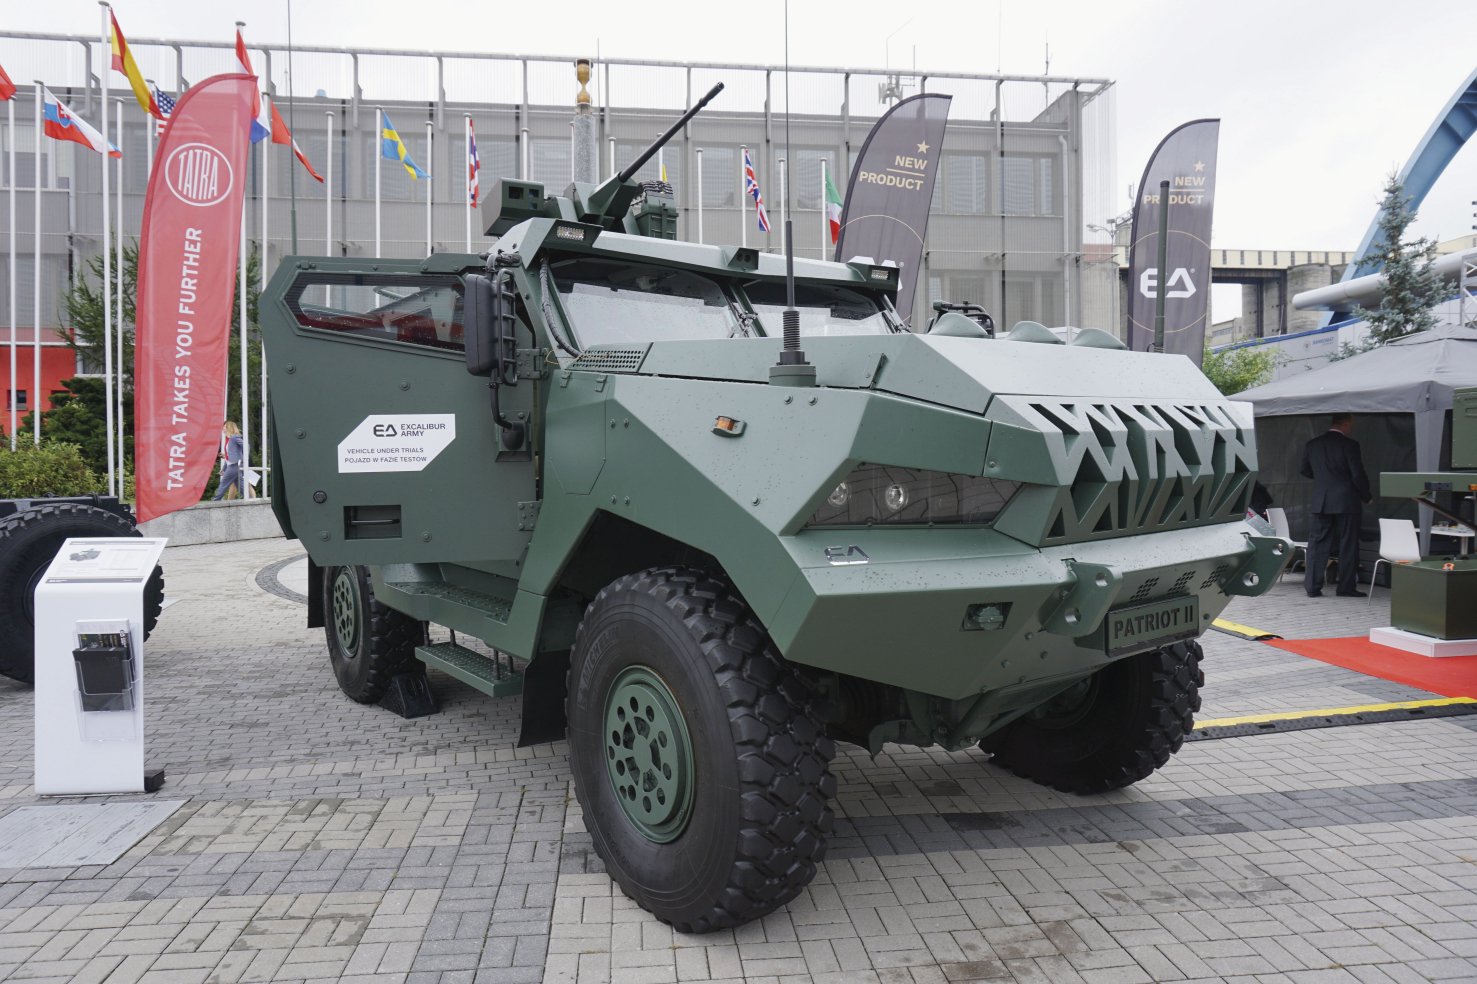 A Patriot II protected mobility vehicle on display at MSPO 2019. This variant is provided with a ROWS armed with a 20 mm automatic cannon, and has space for six dismounts. ( Markit/Mark Cazalet)